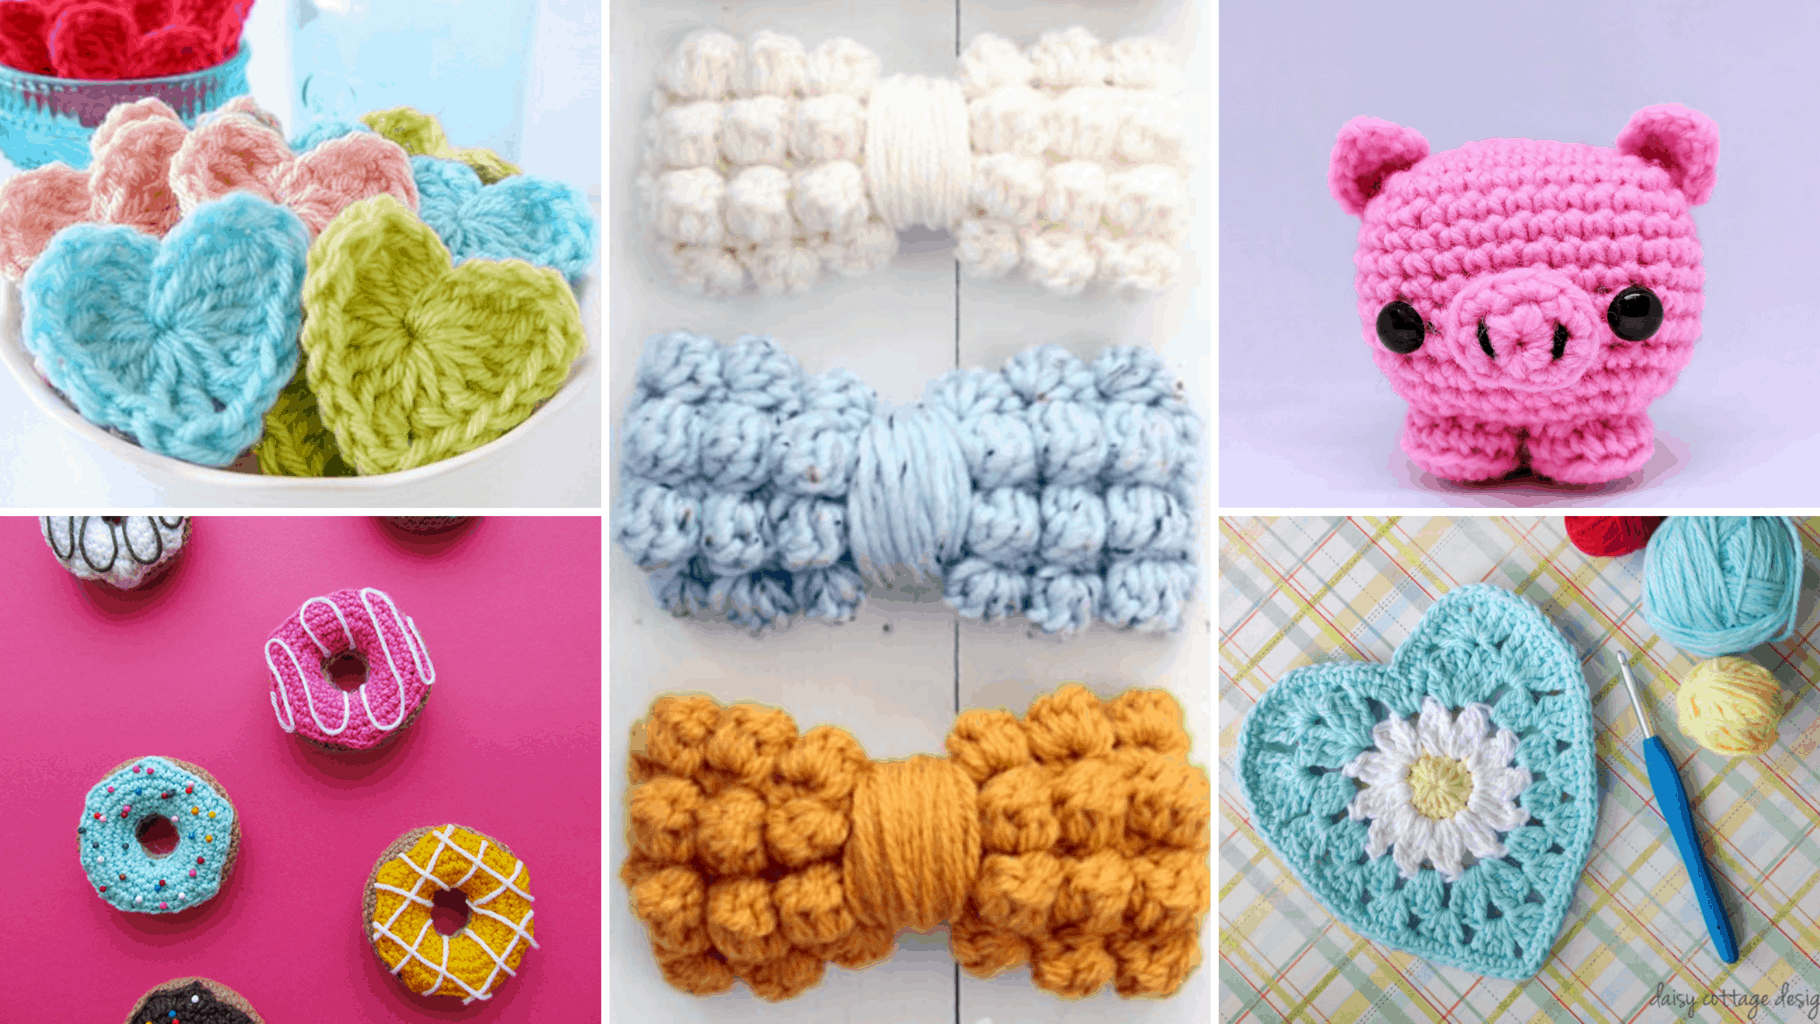 Adorable Amigurumi Patterns for Your Next Craft Project